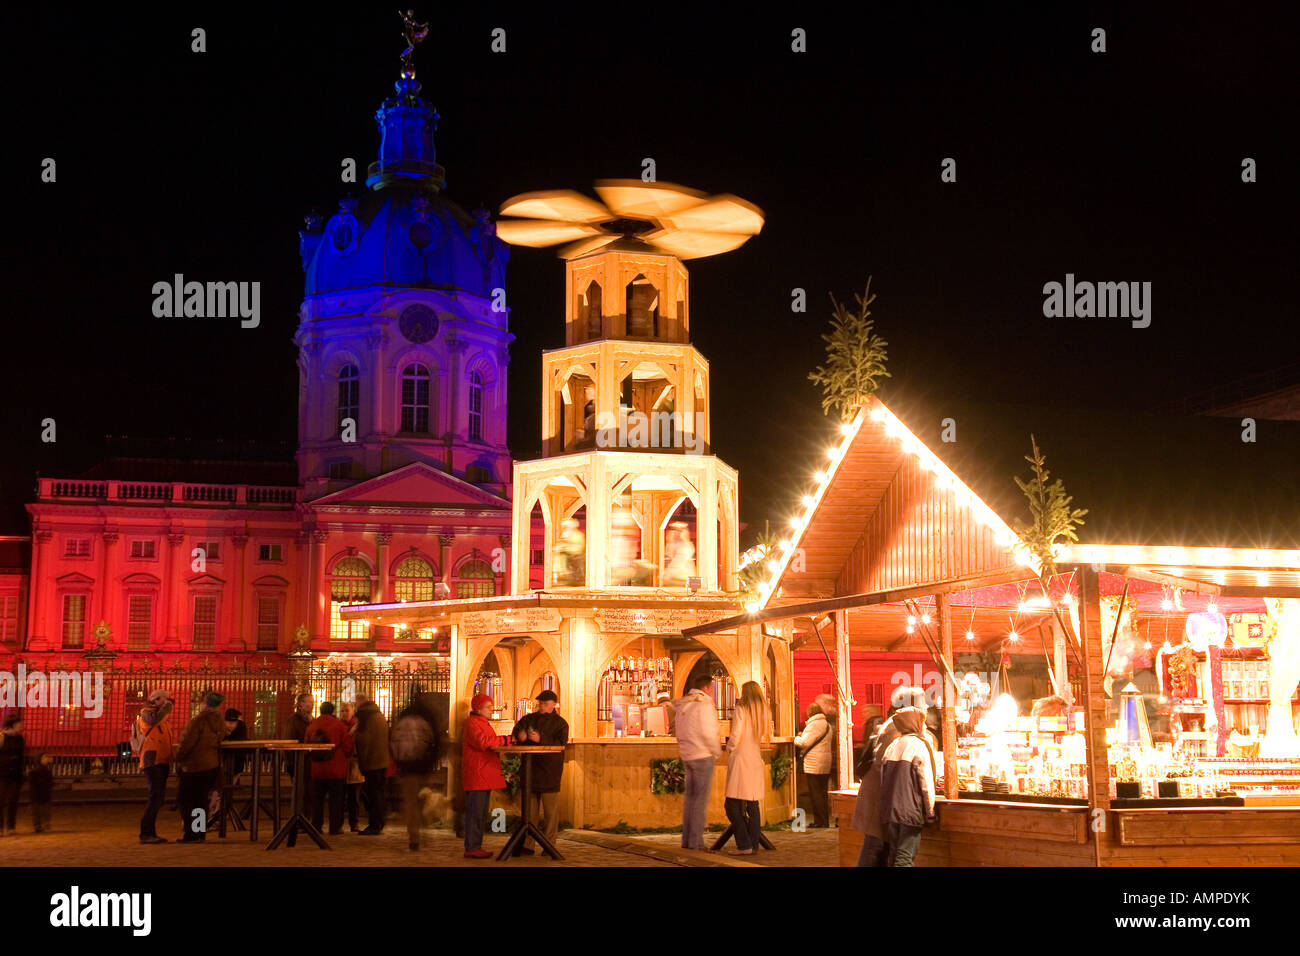 Christmas market in front of the illuminated Charlottenburg Palace the summer residence of the Prussian kings built from 1695 to Stock Photo